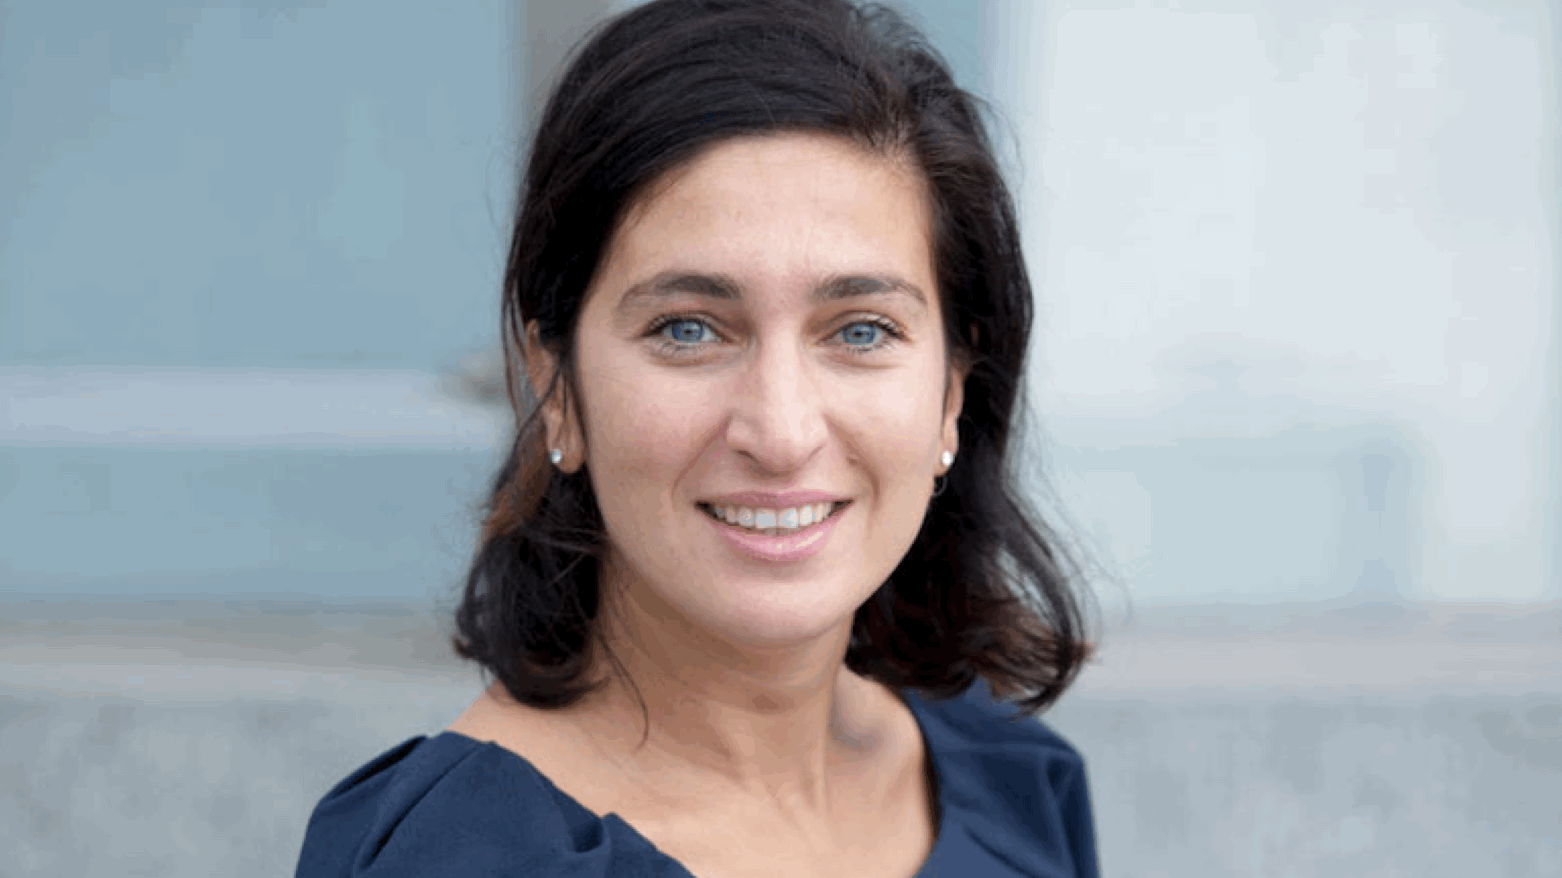 Flemish Minister for Environment, Justice and Tourism Zuhal Demir (Photo: Flemish government)